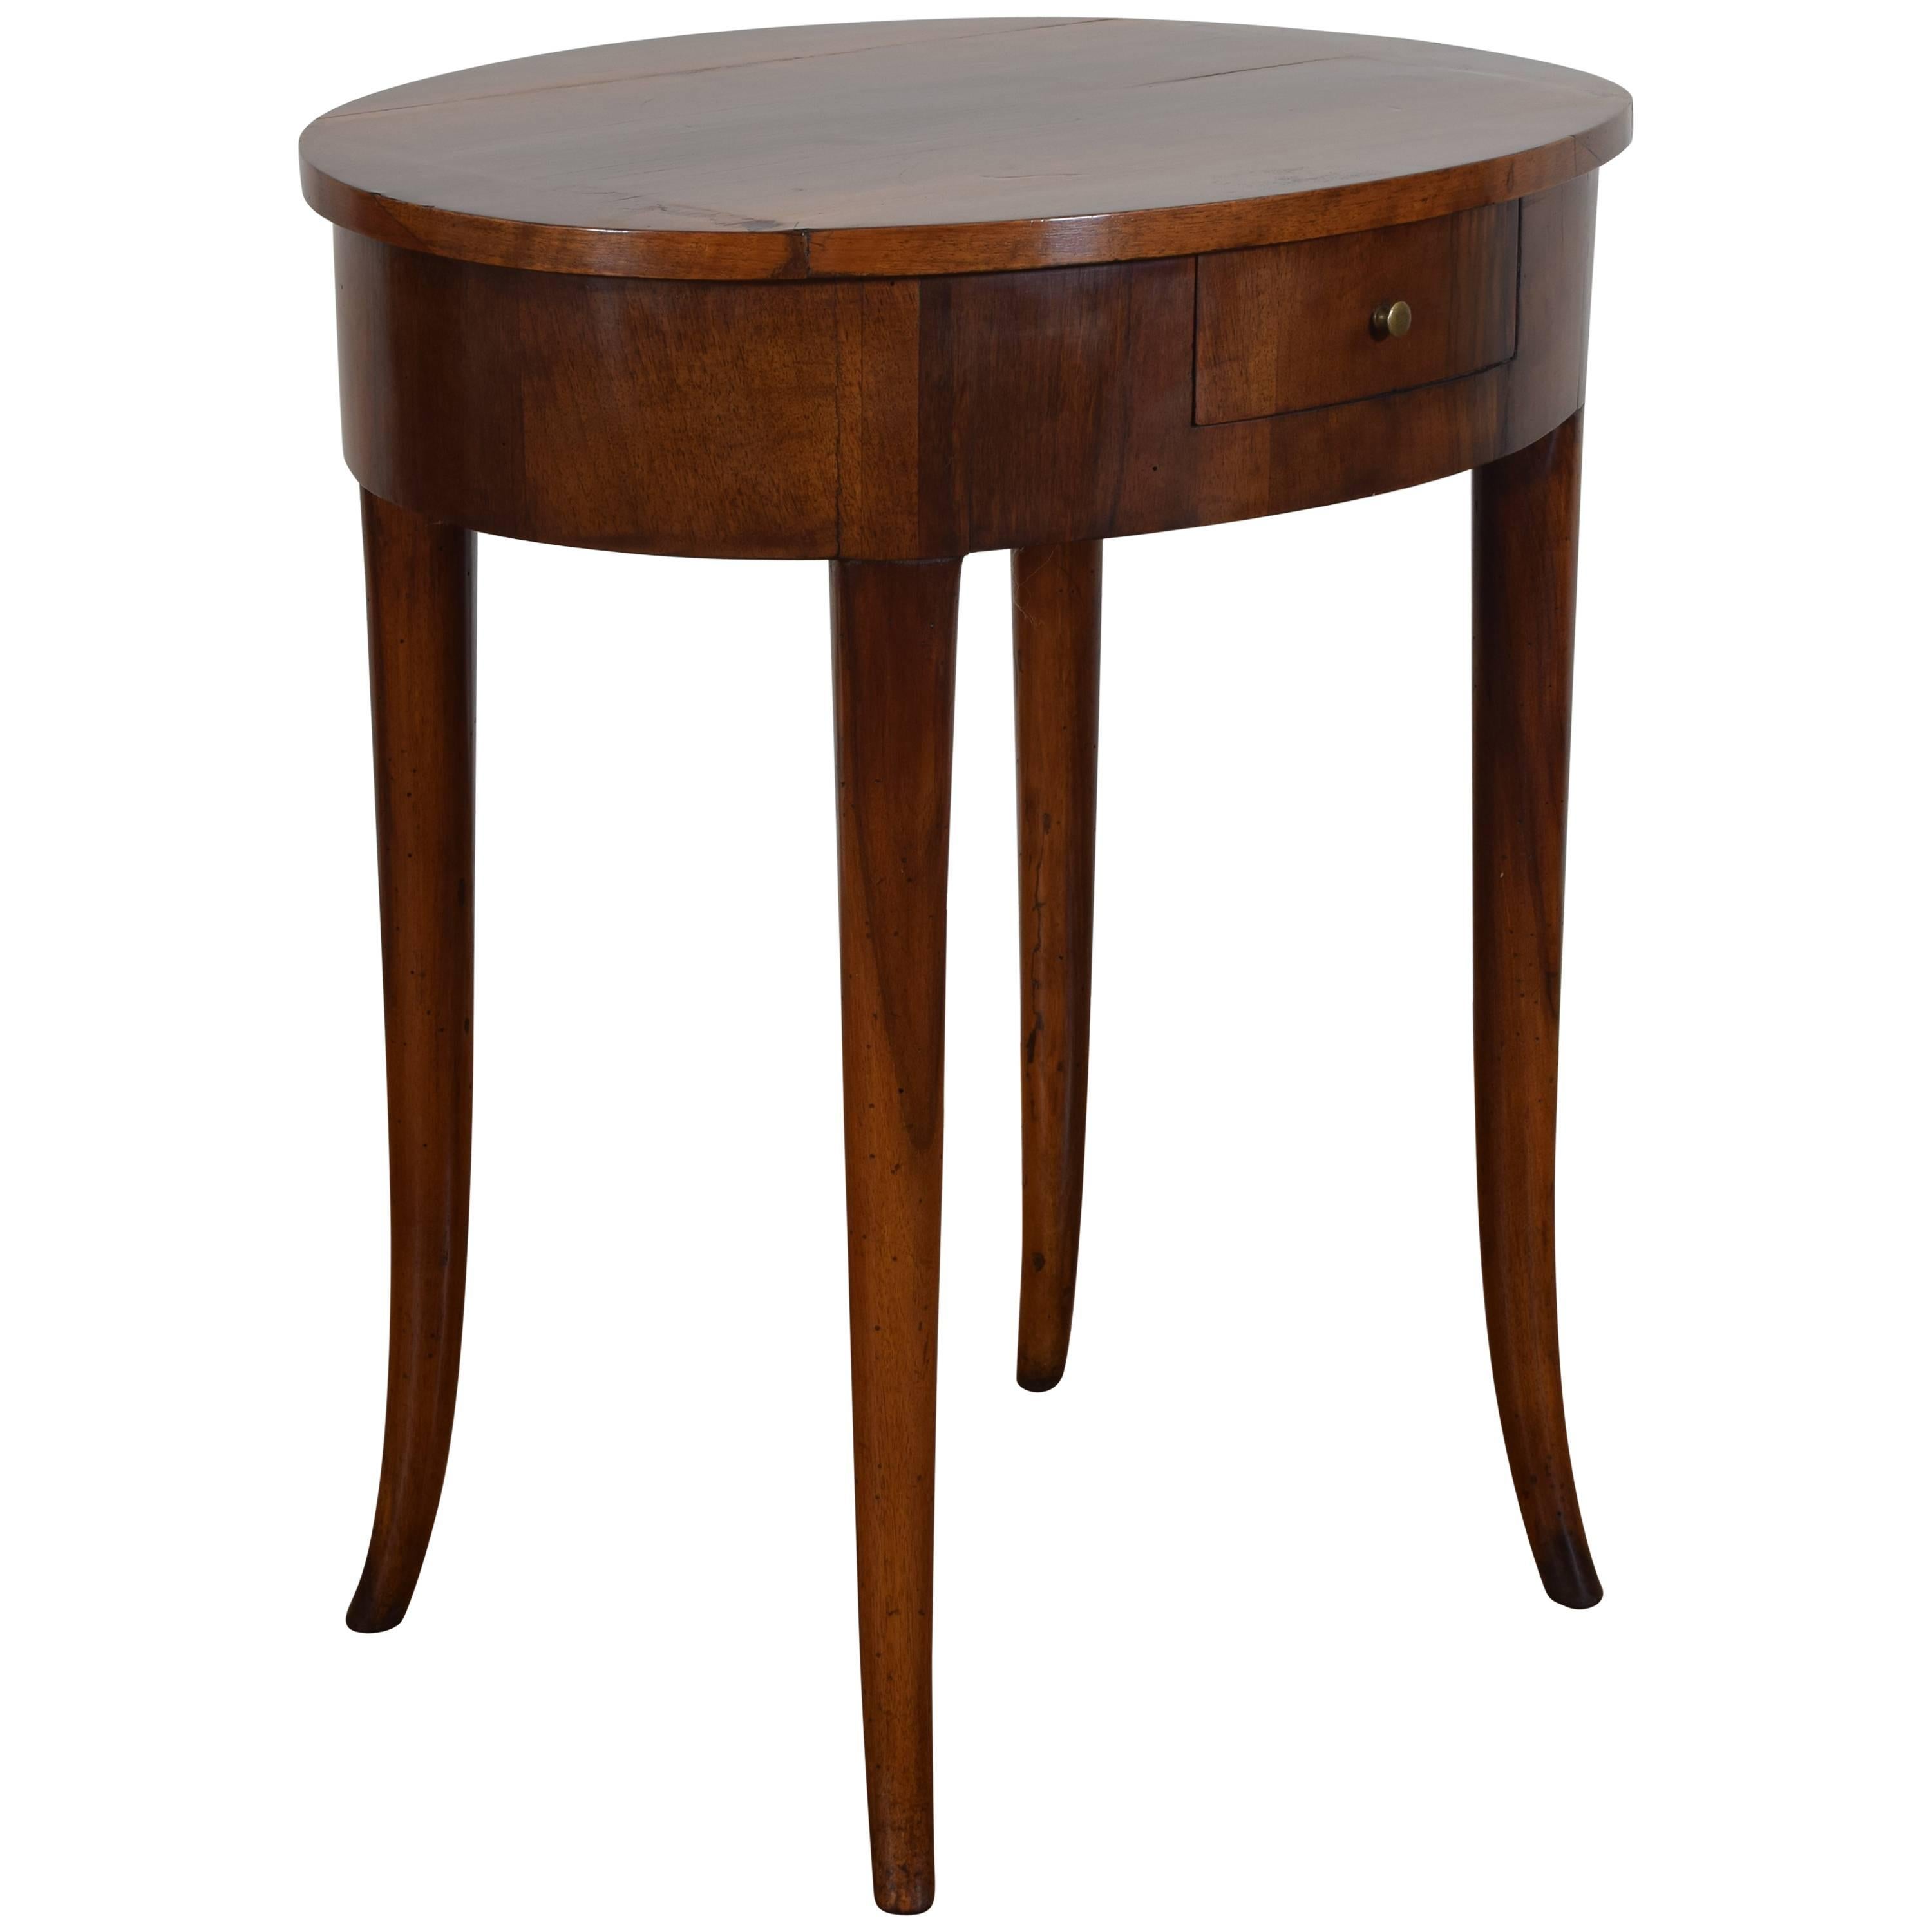 Italian Neoclassical Walnut Oval One Drawer Side Table, 19th Century